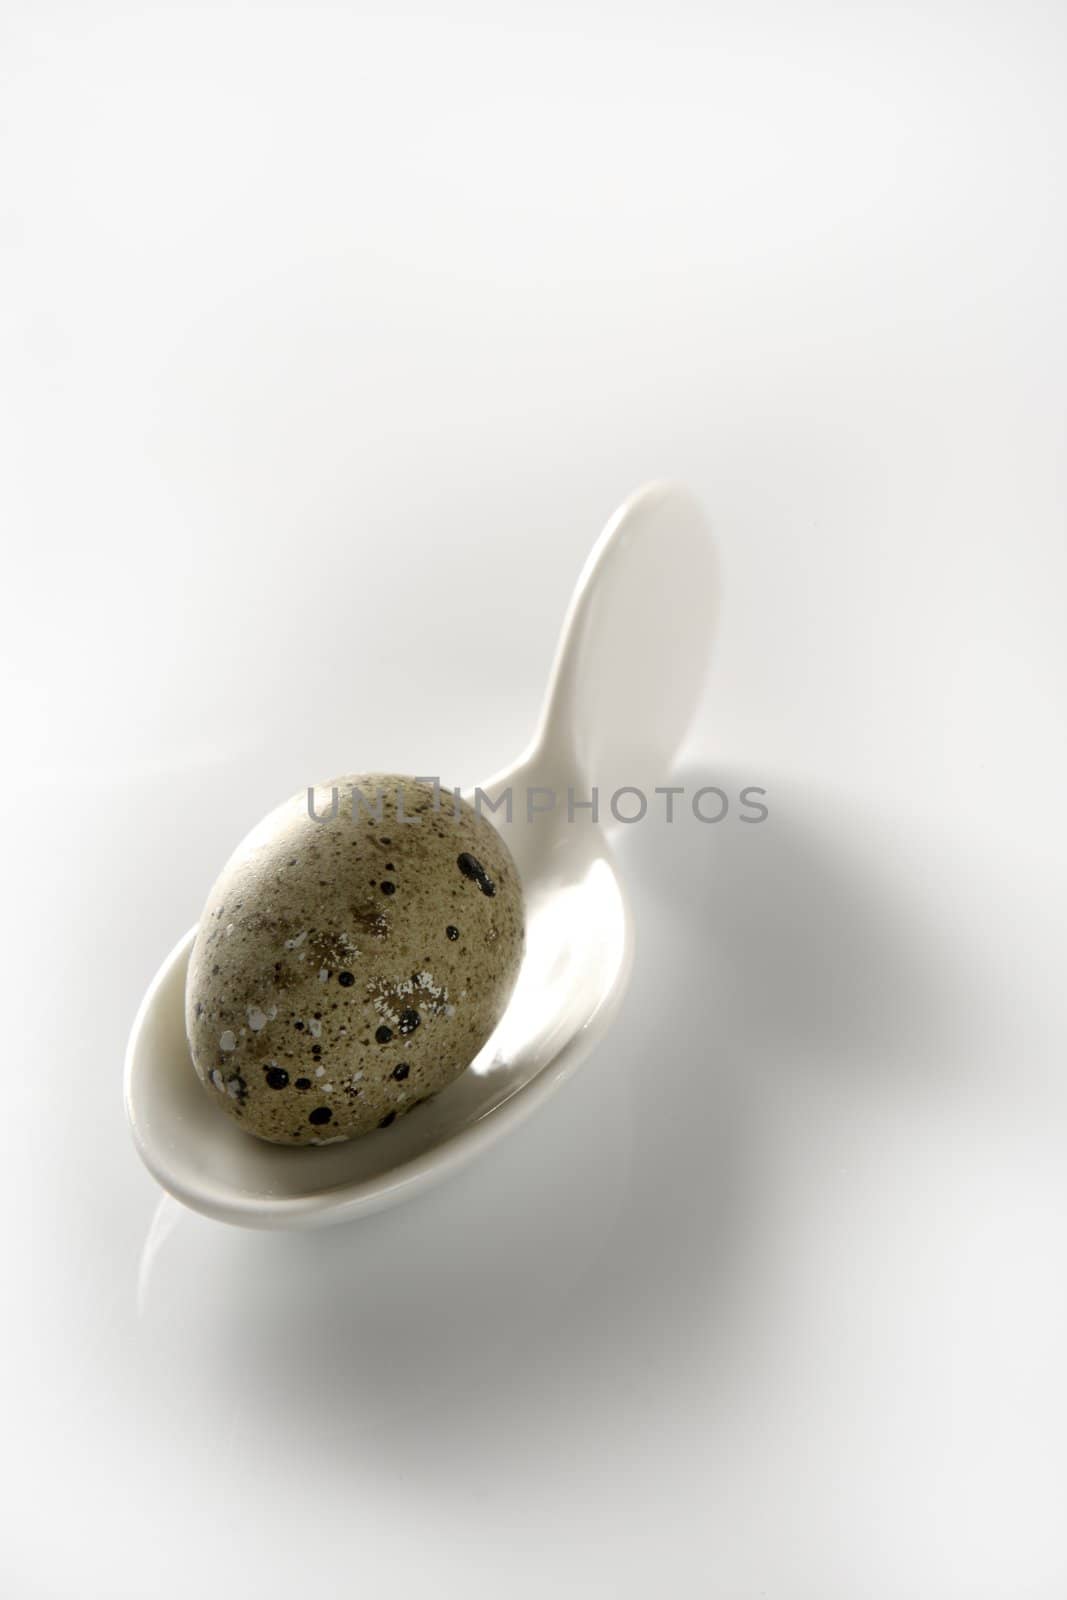 Quail egg in a ceramic white spoon in a simple studio white background composition